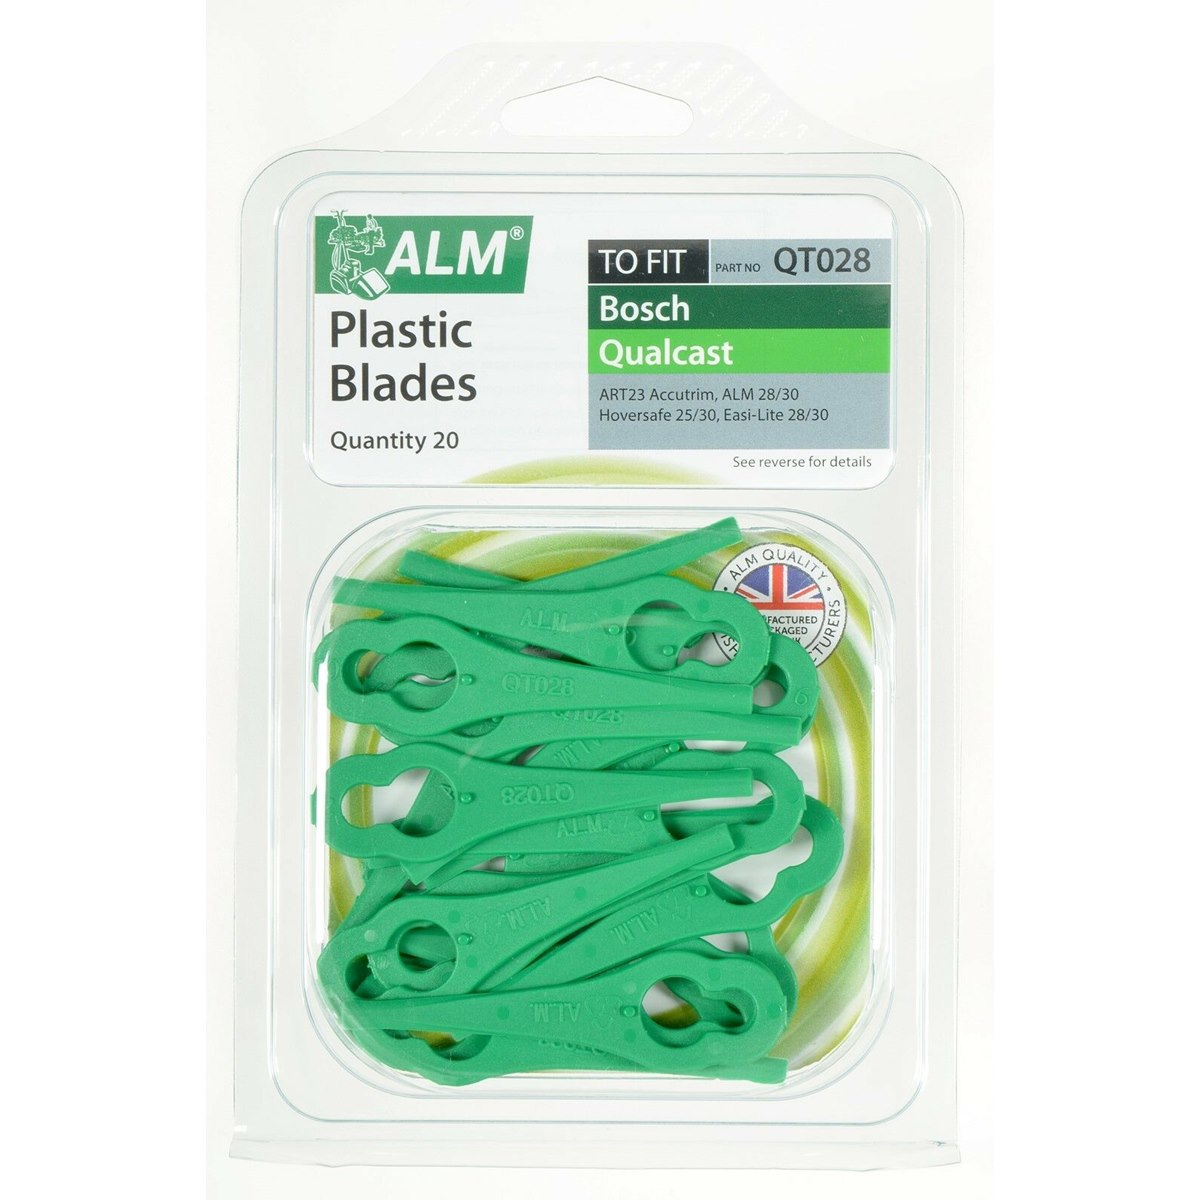 ALM QT028 Plastic Strimmer Blades Bosch and Qualcast Models Pack of 20